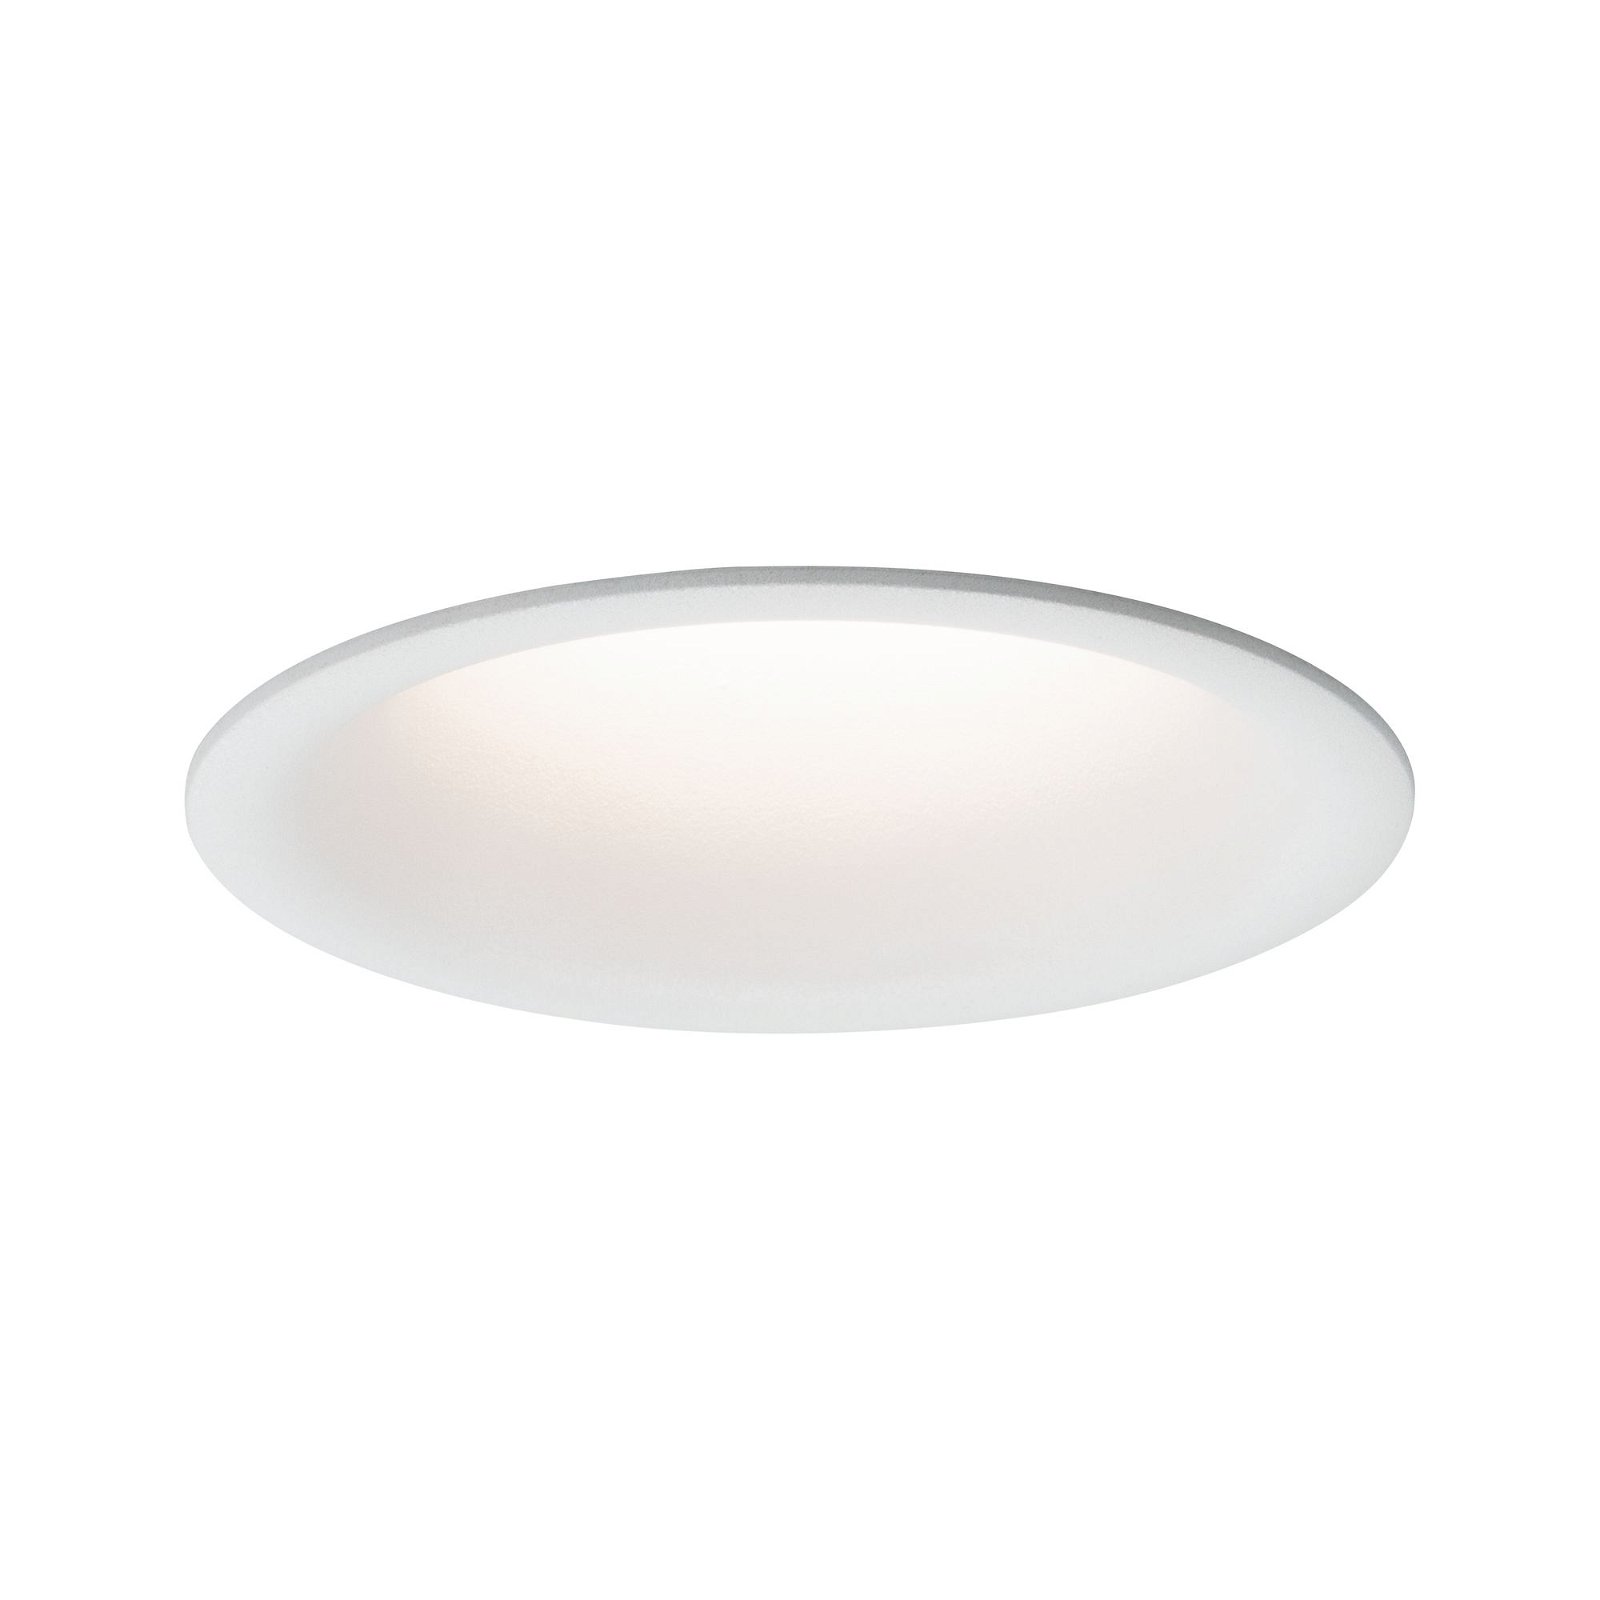 LED Recessed luminaire Cymbal Coin round 77mm max. 10W dimmable Matt white